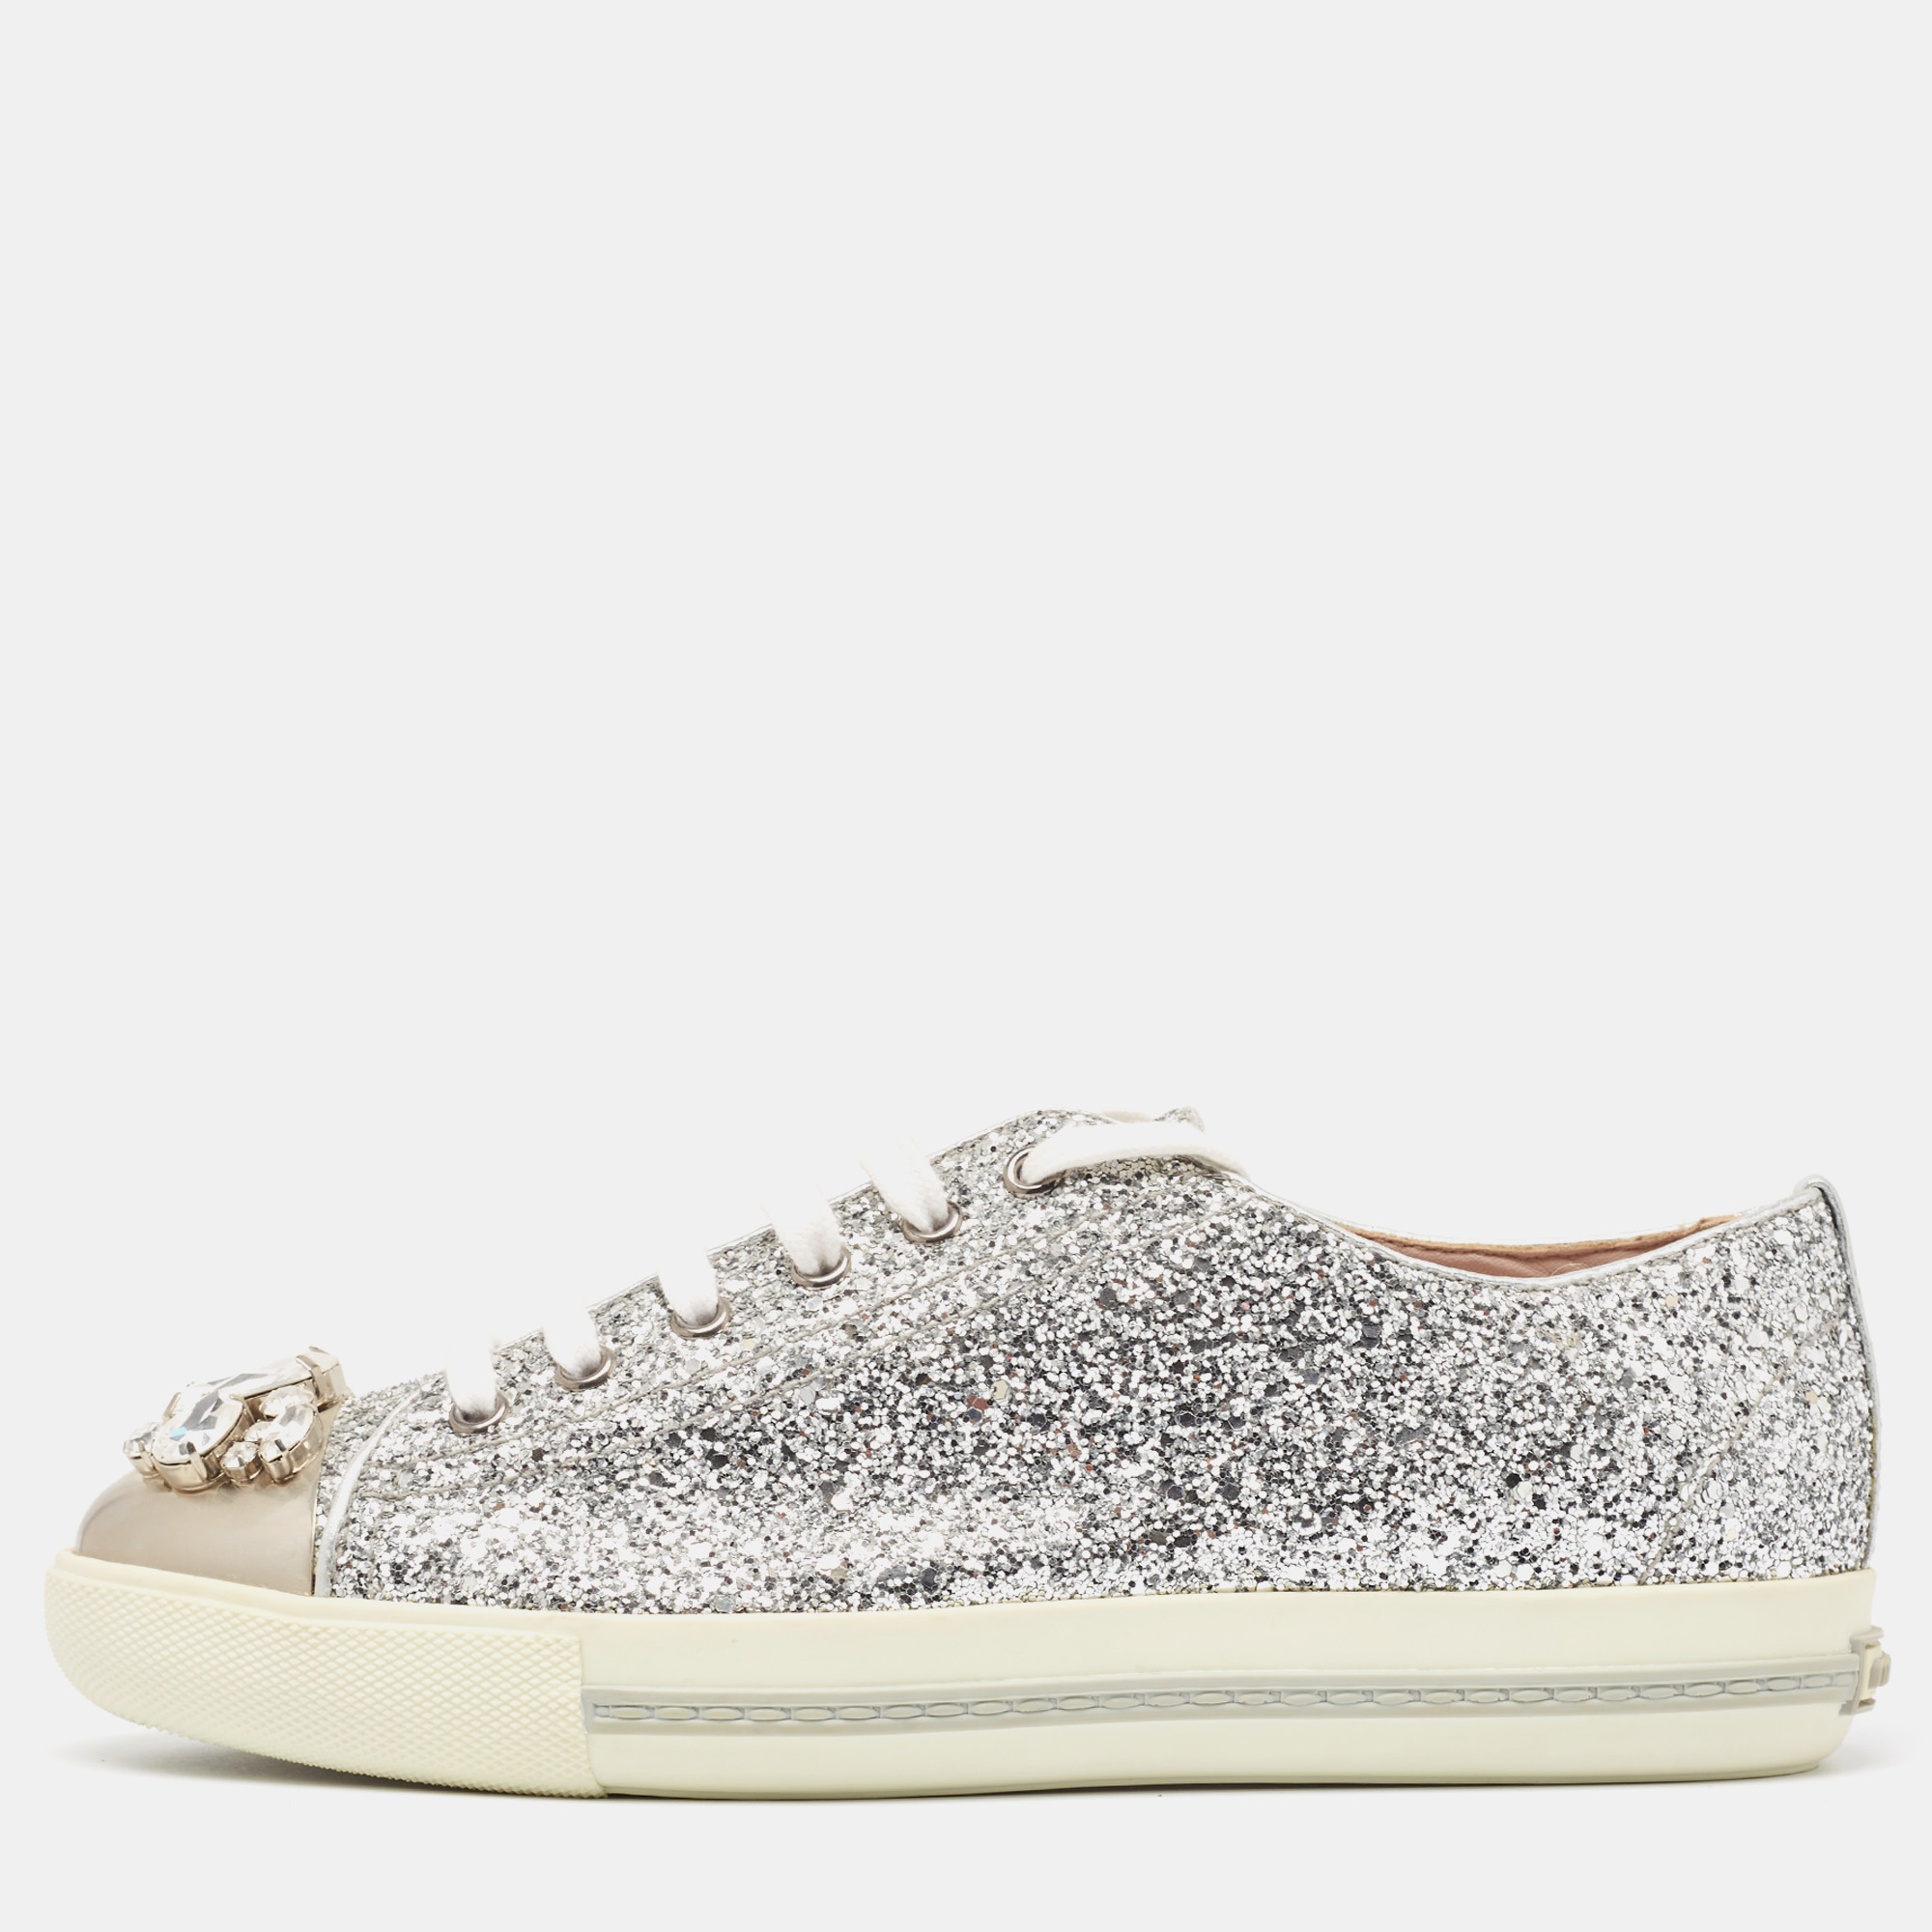 Miu miu silver glitter and leather crystal embellished sneakers size 39